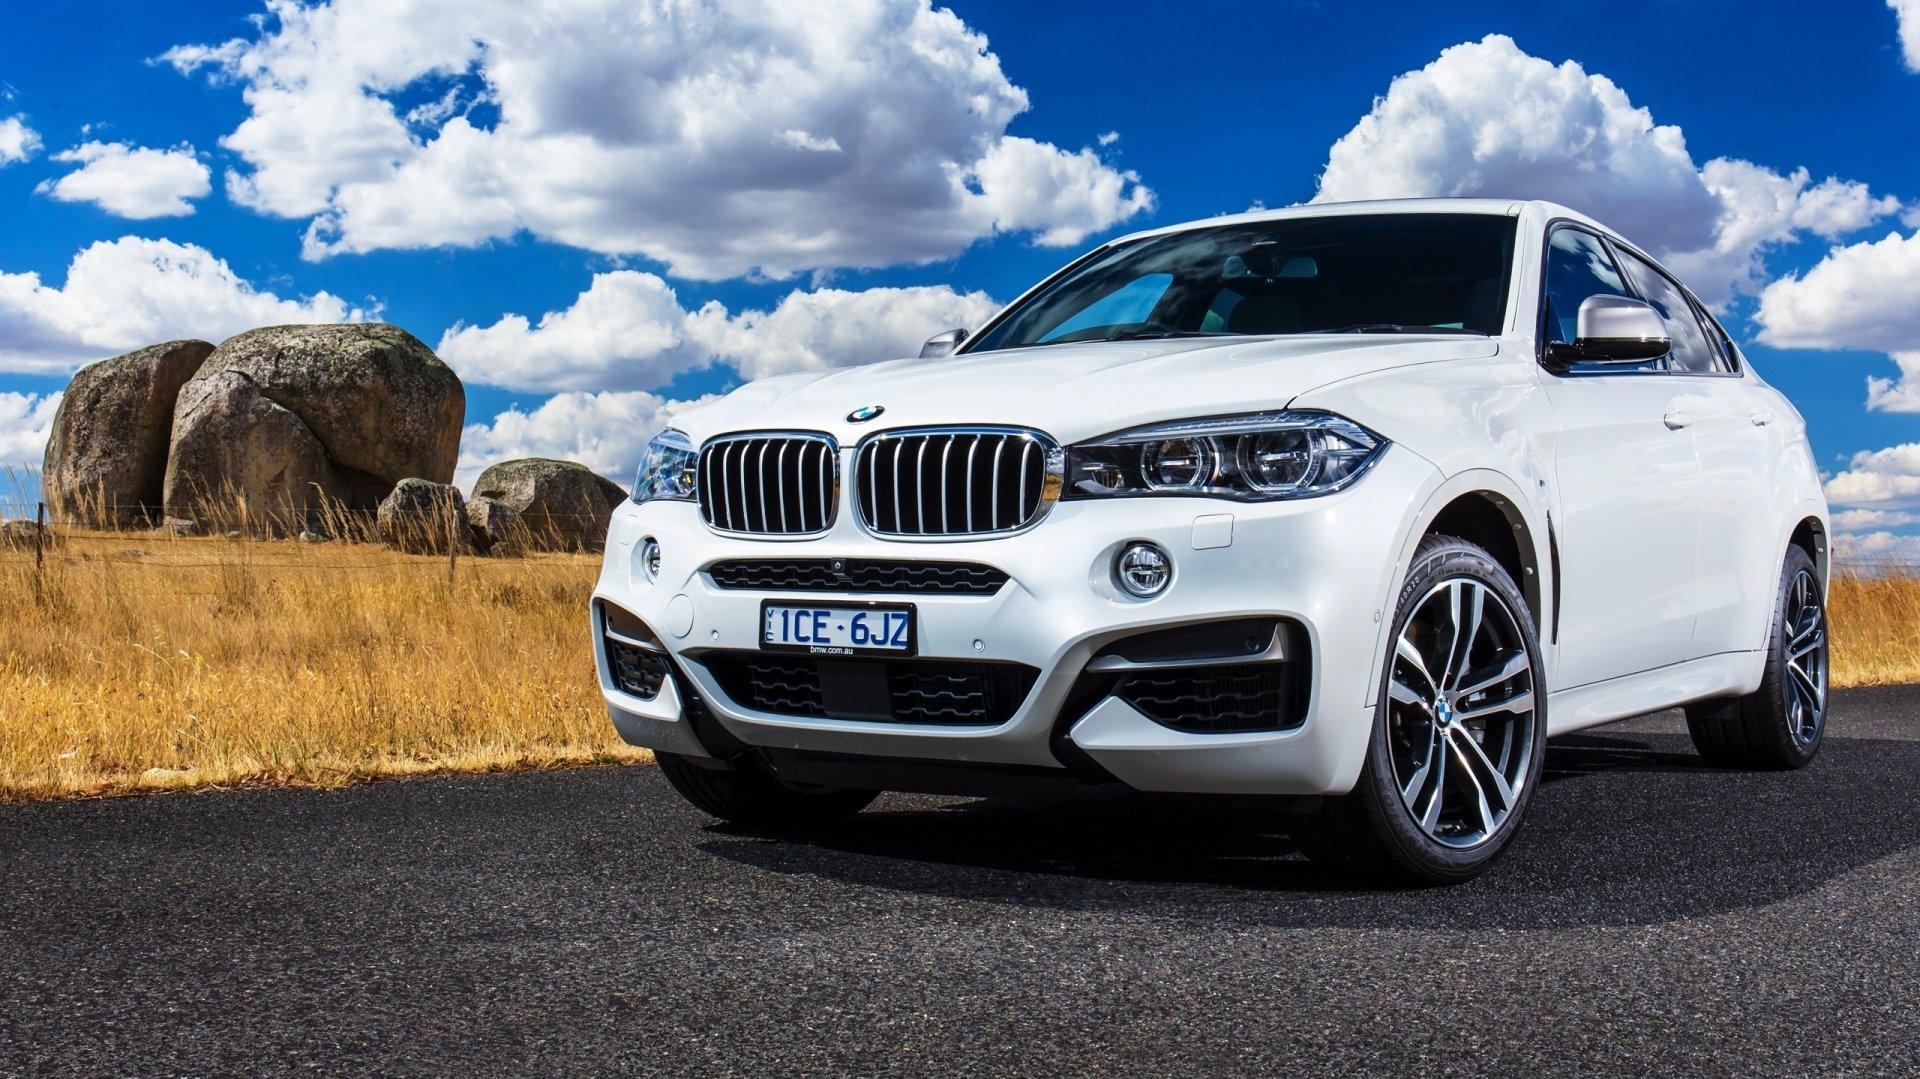 Bmw X6 HD Wallpaper And Background